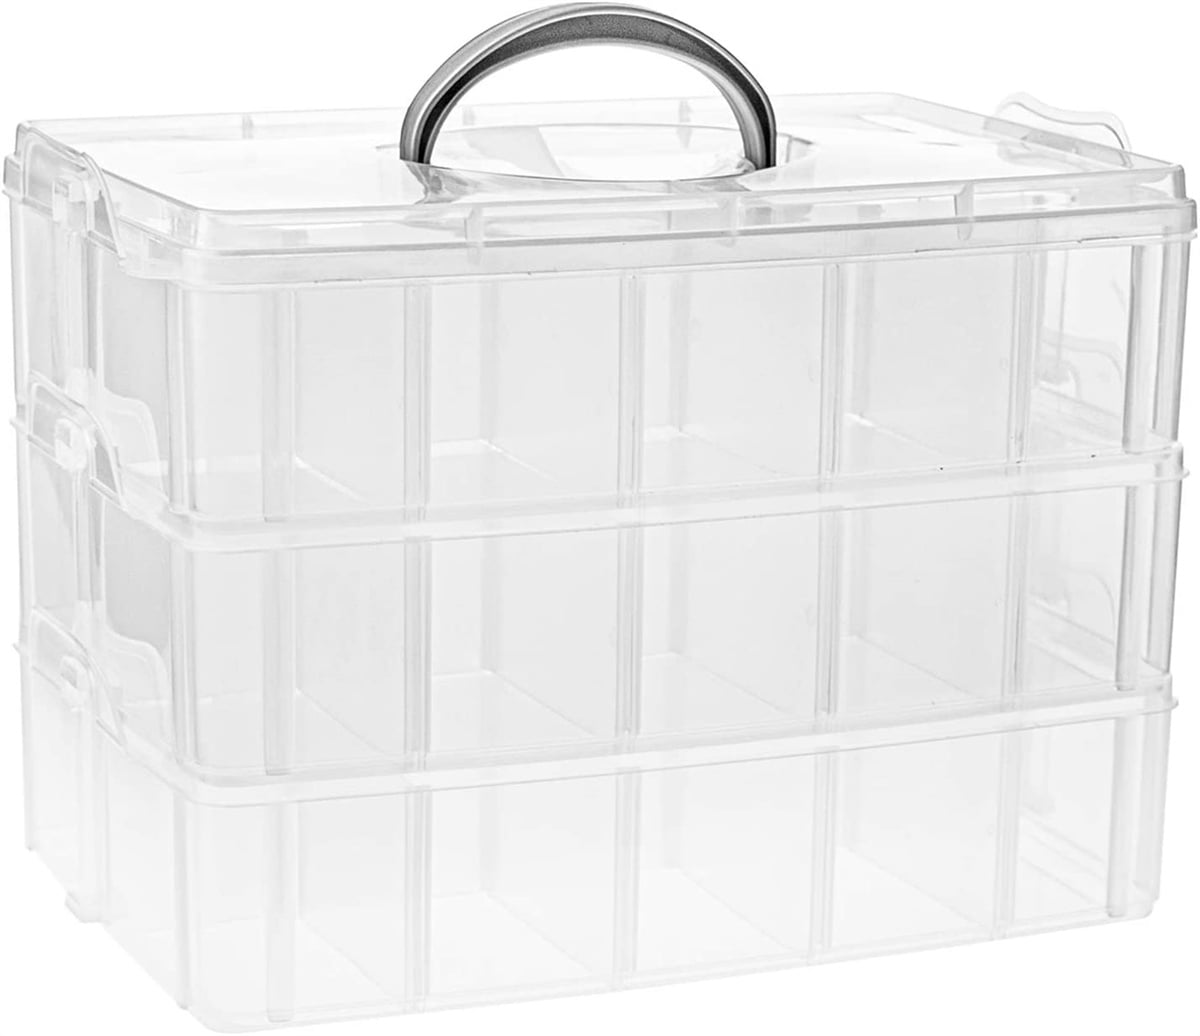 Casewin Stackable Craft Organizer Box, 3-Layer Small Storage Container  Case, with Adjustable Compartments for Beads, Crafts, Jewelry, Fishing